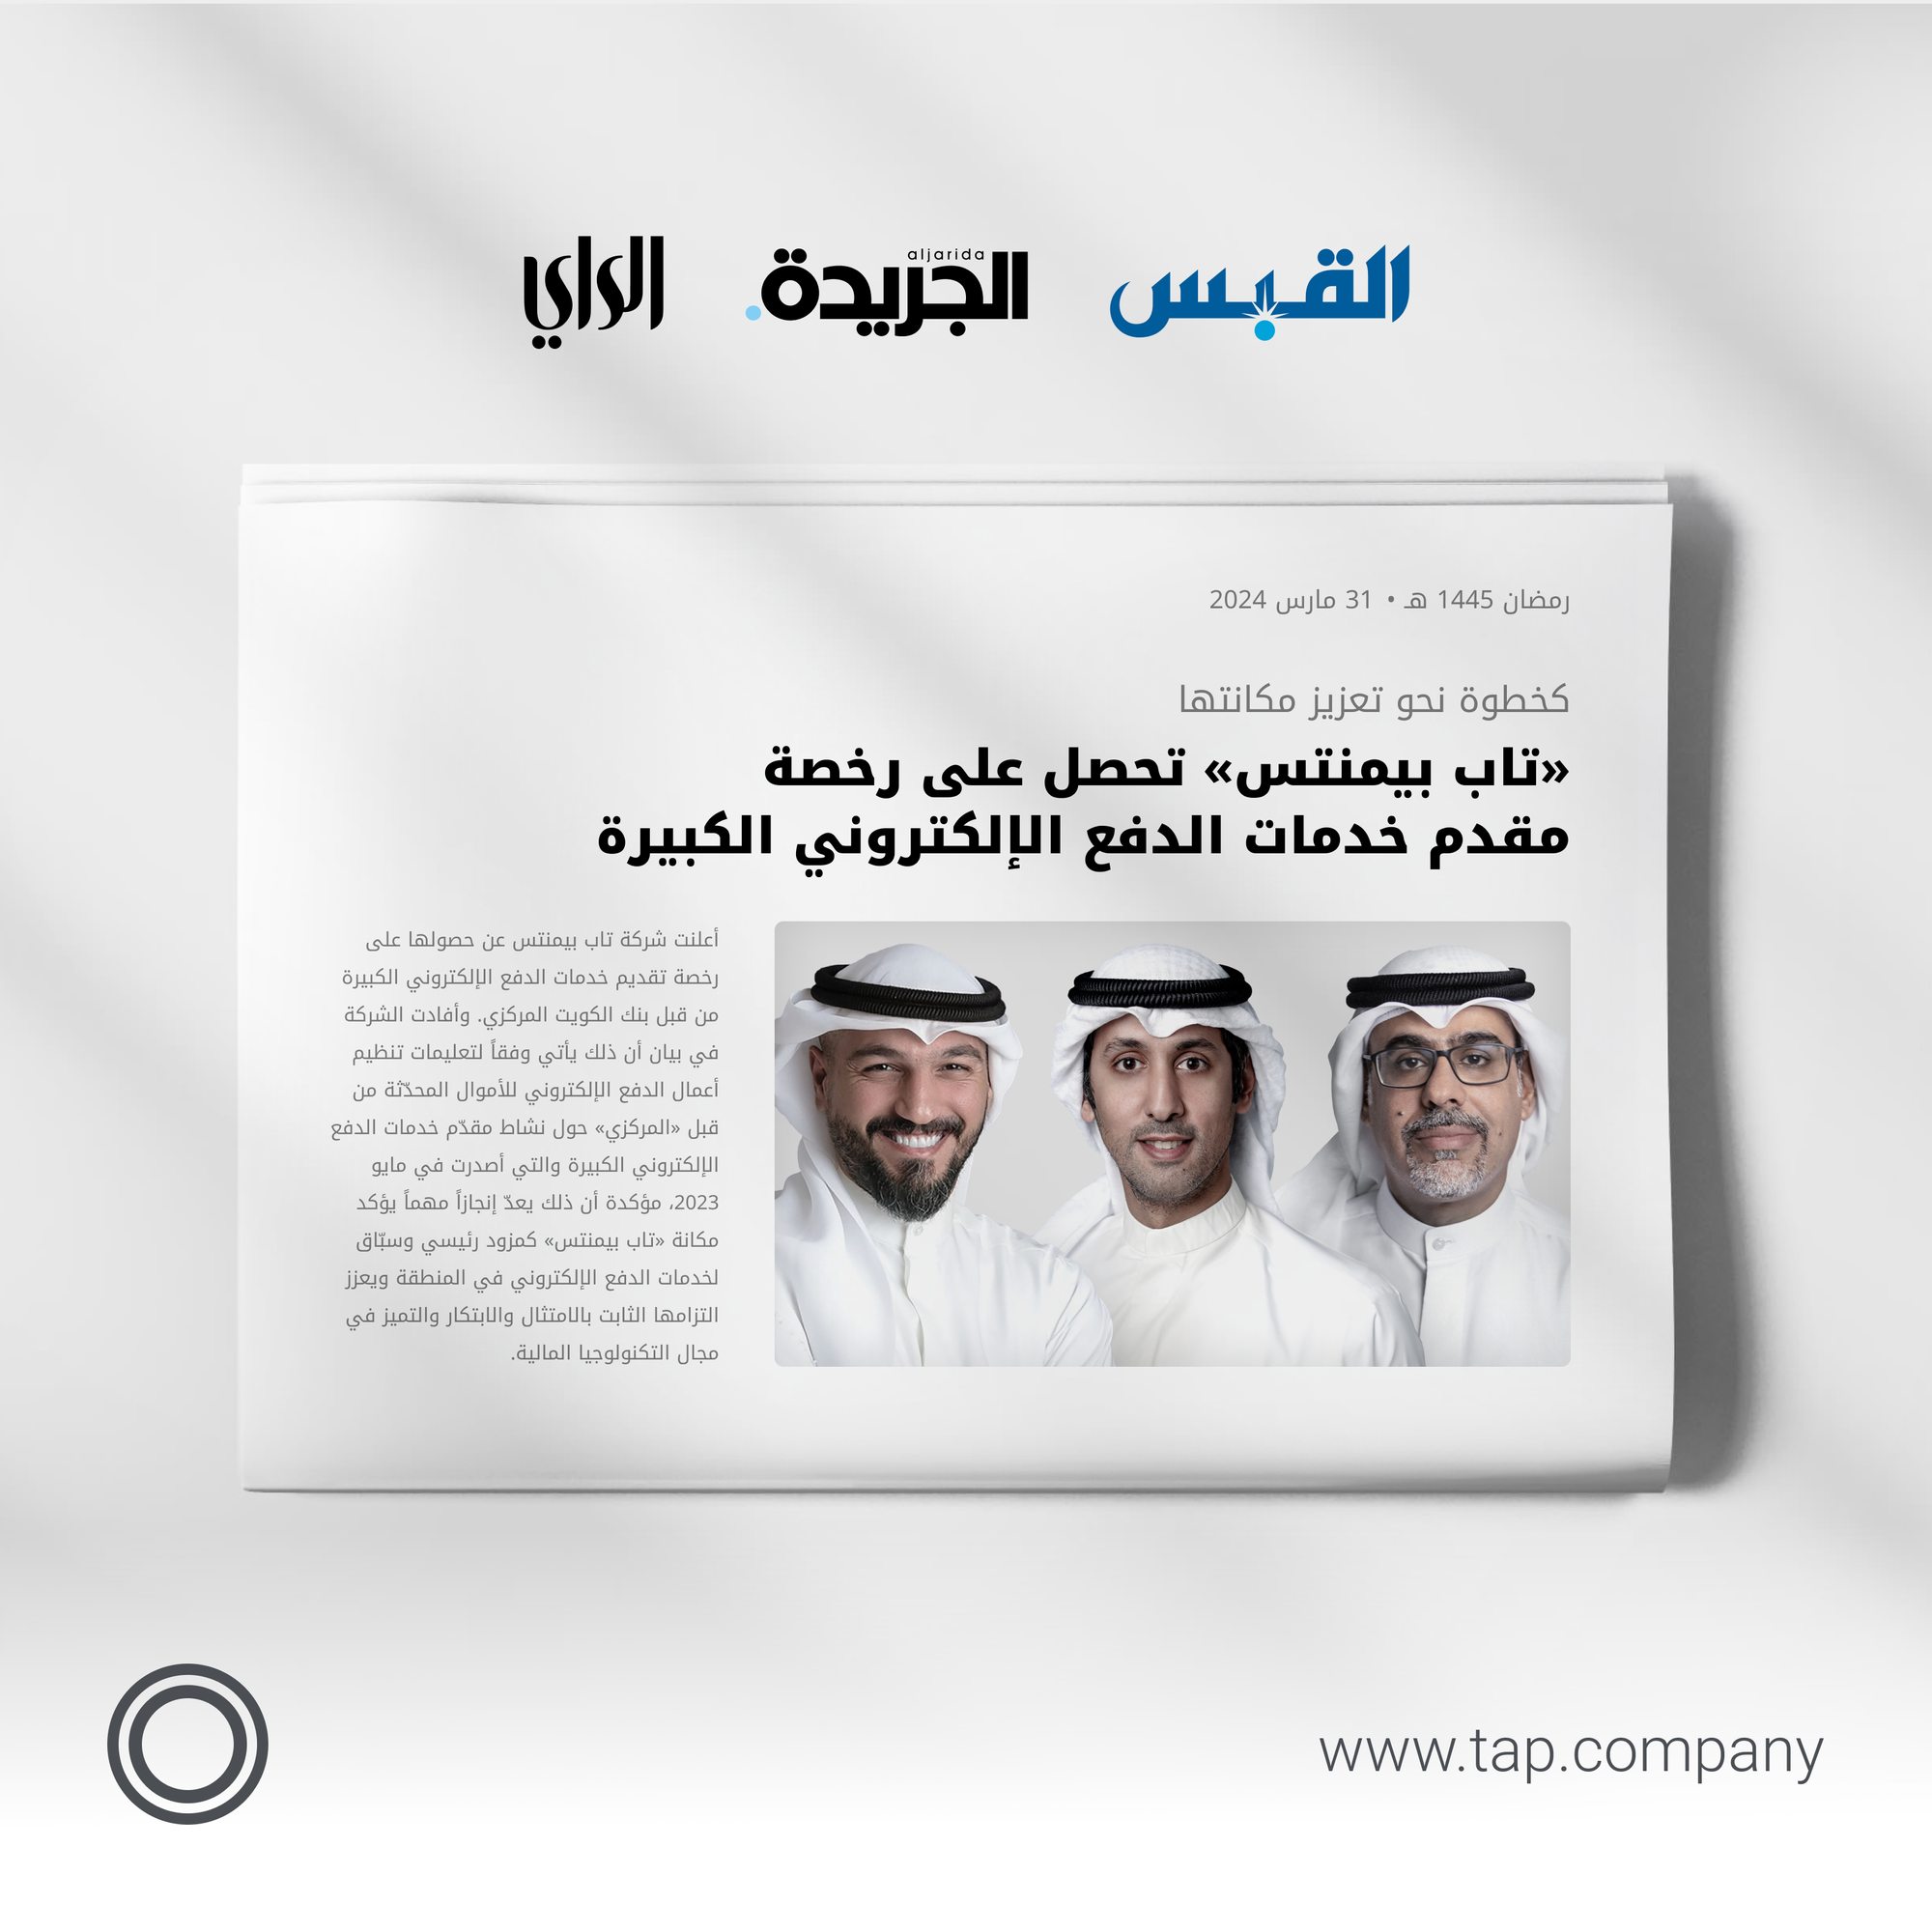 Tap Payments Secures Electronic Payment Service Provider License from the Central Bank of Kuwait